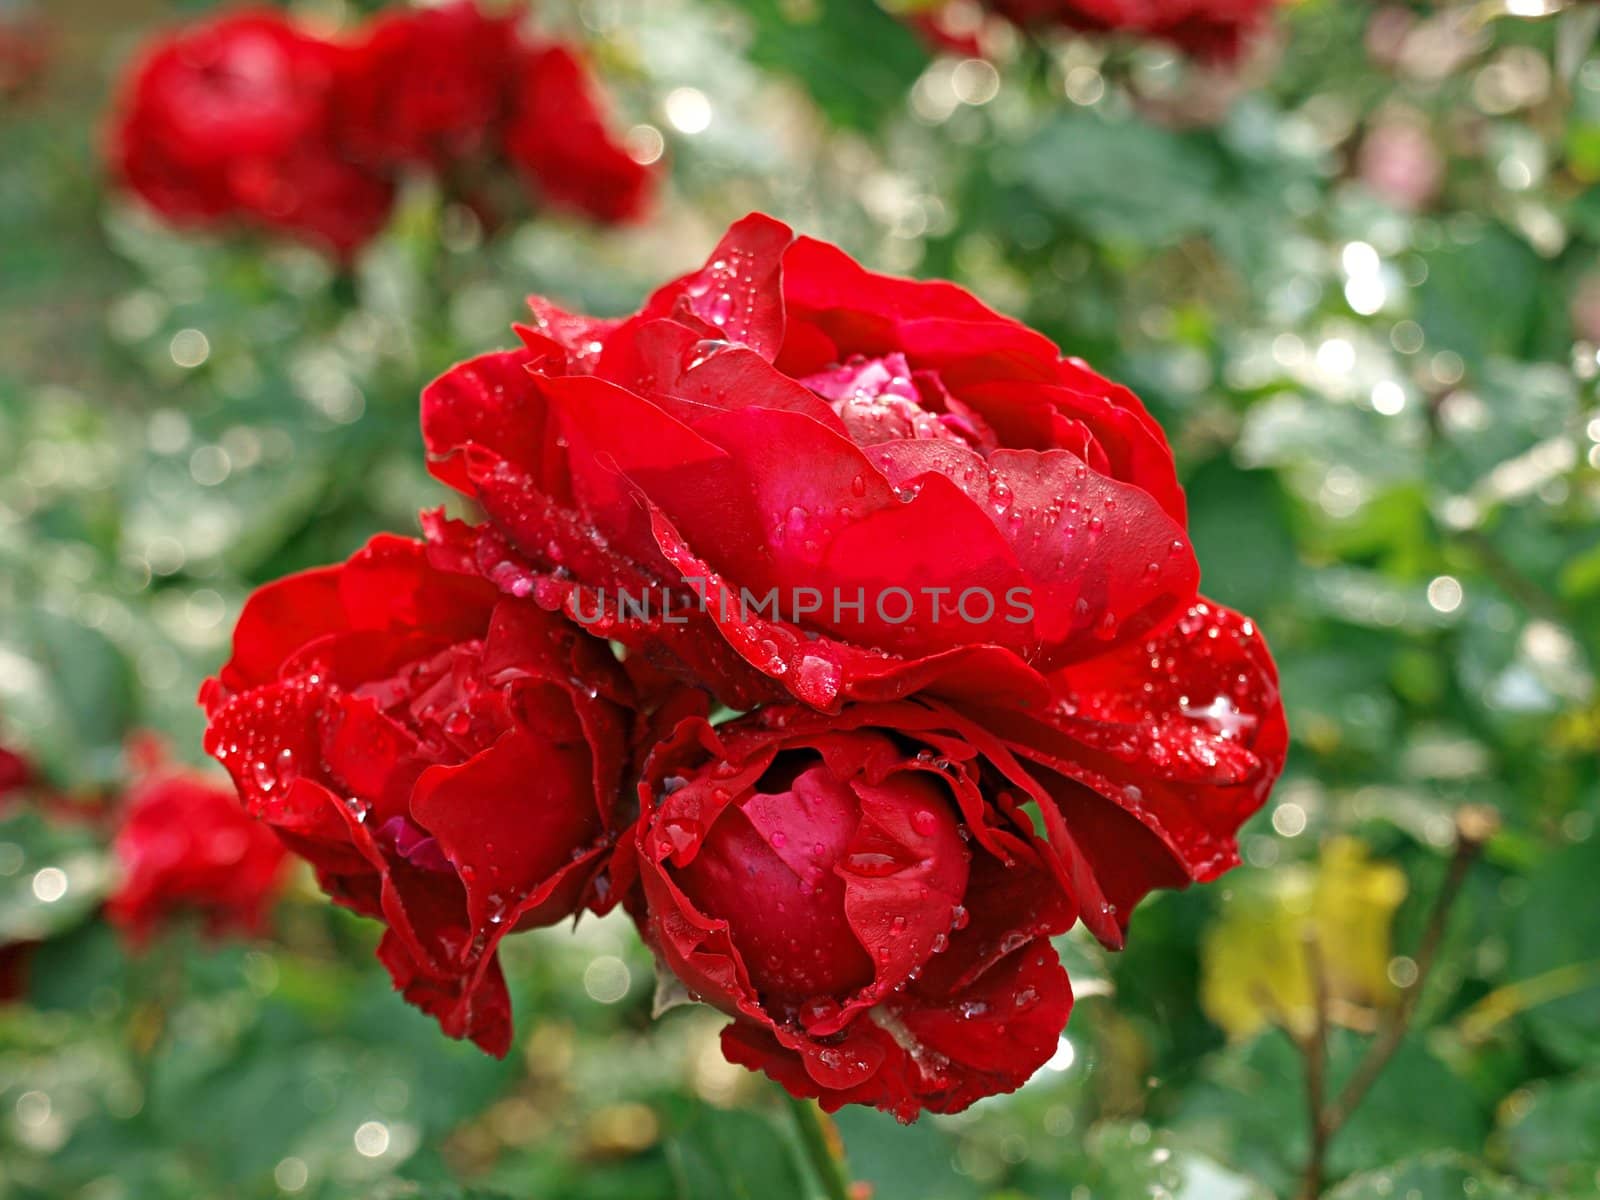 Blooming red rose with droplets by Ronyzmbow